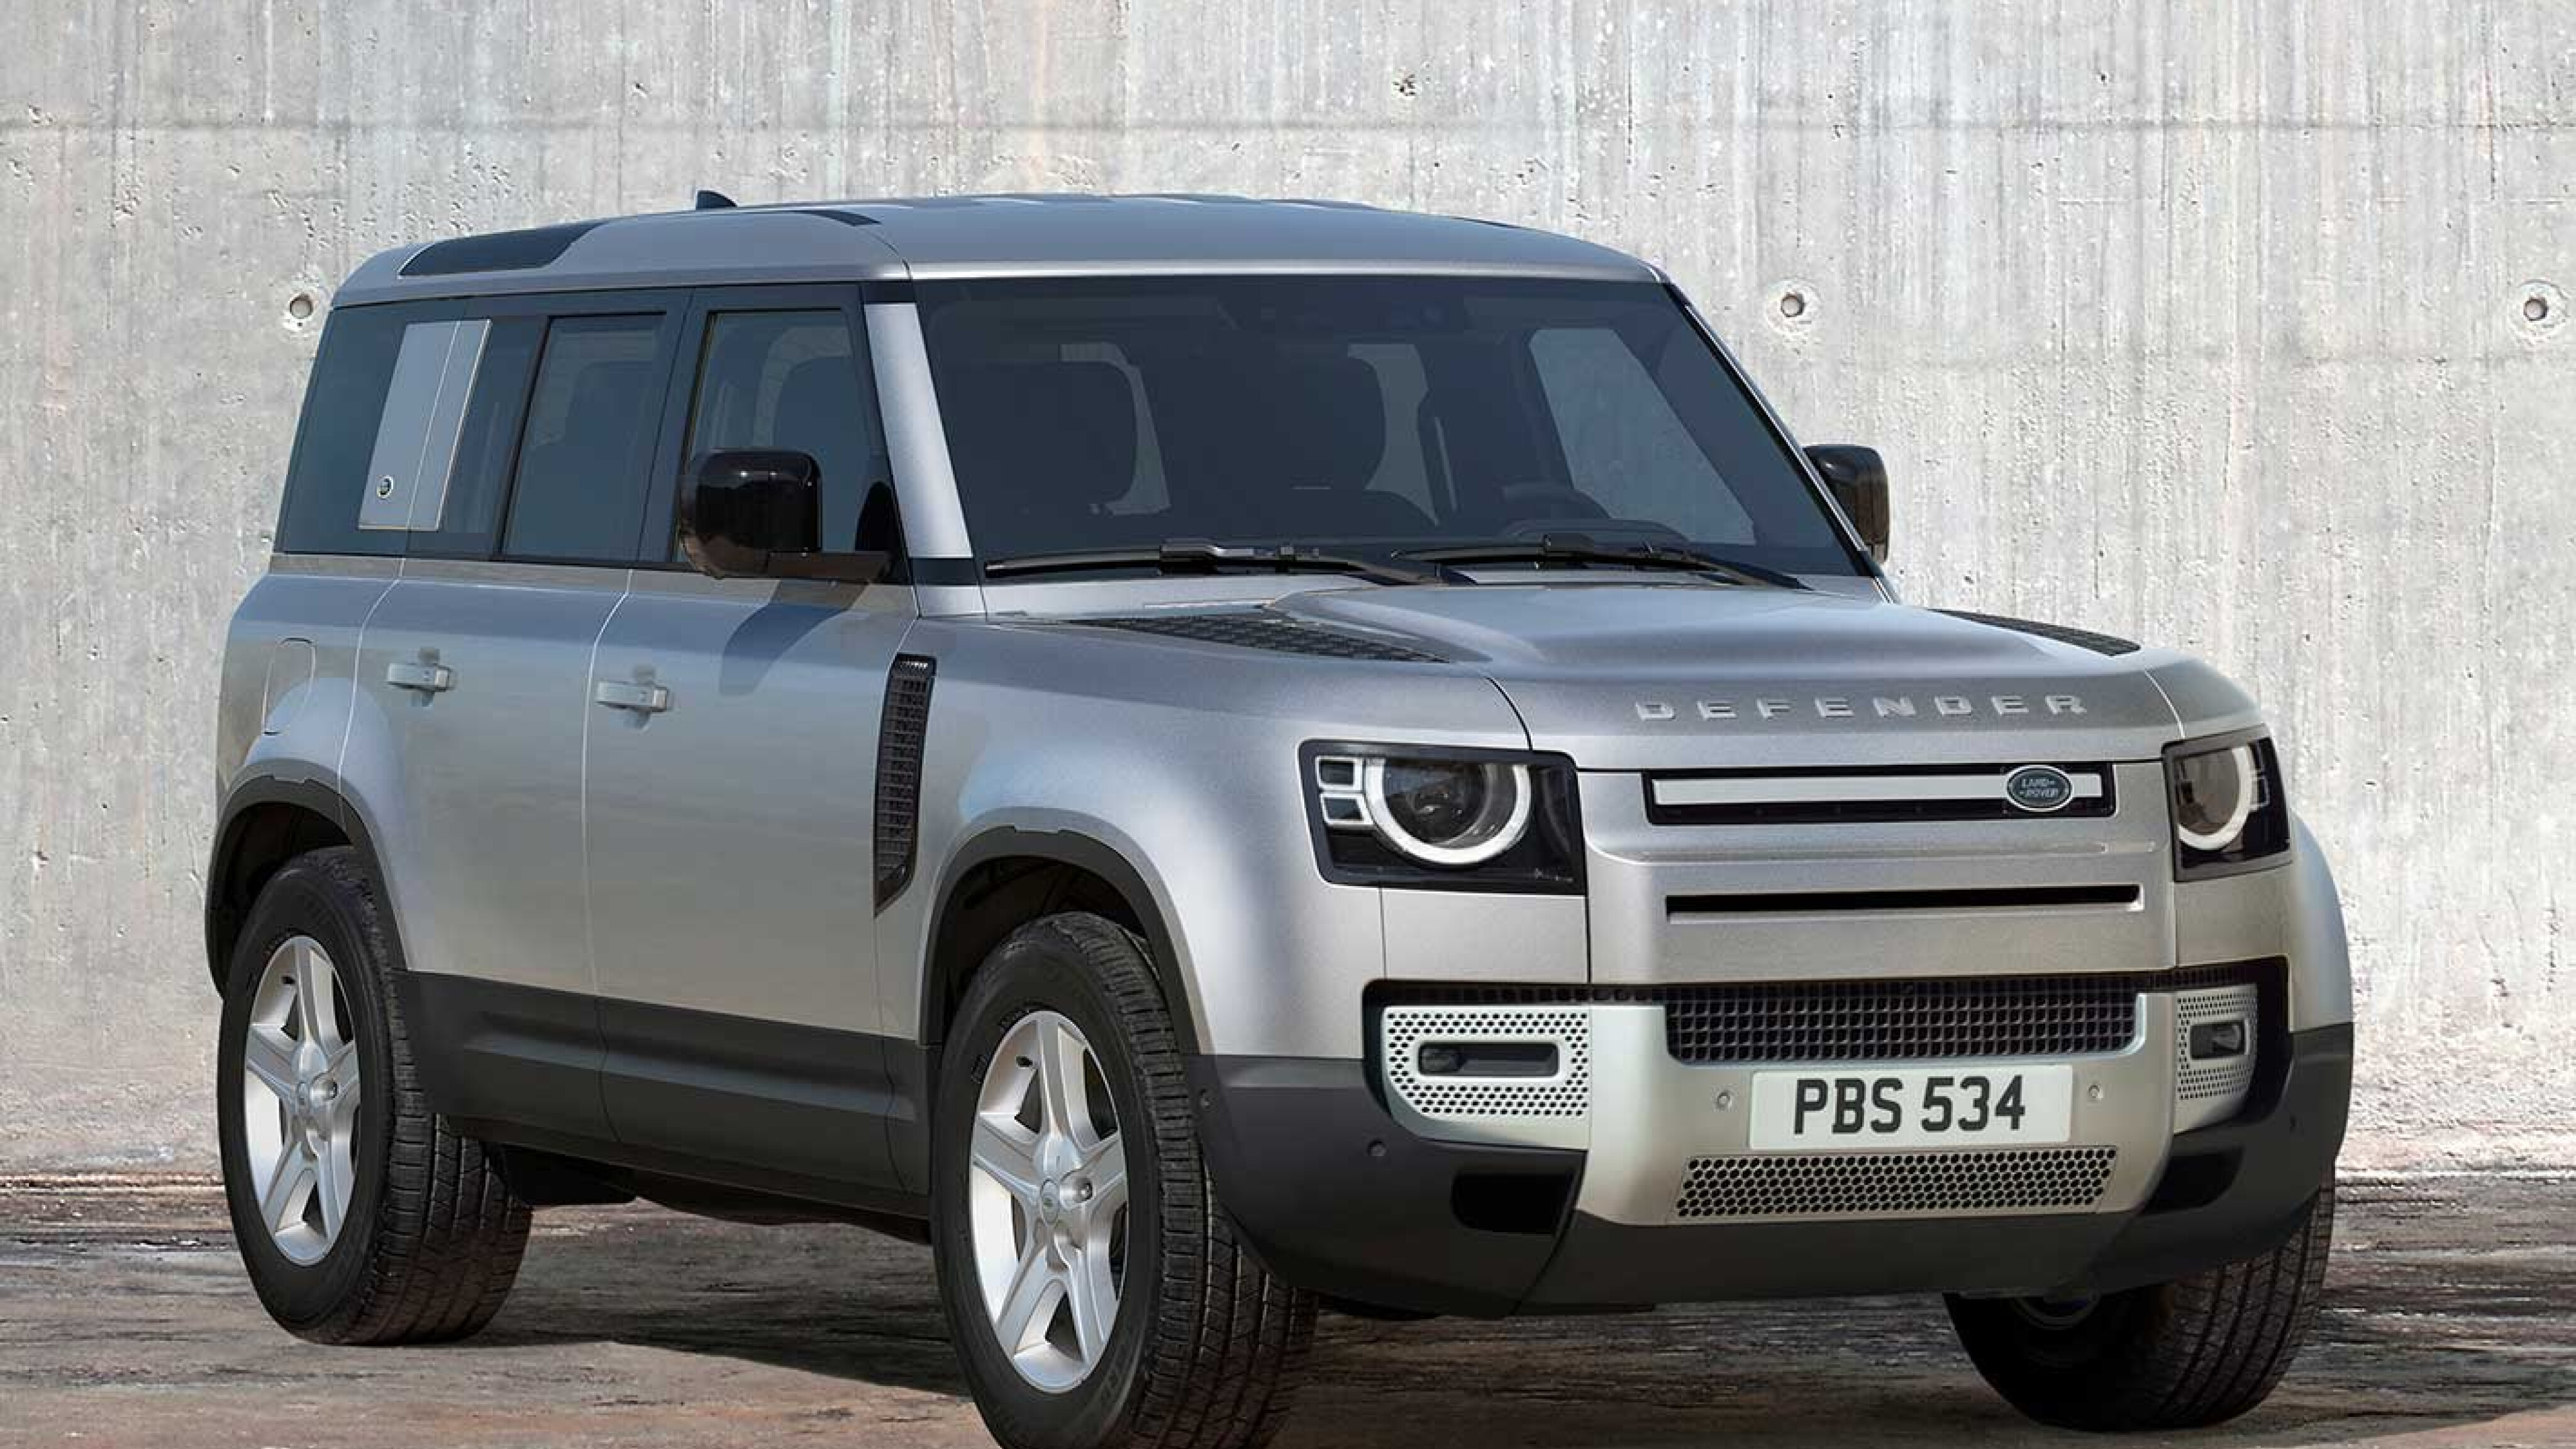 2020 Land Rover Defender: 50 things you need to know